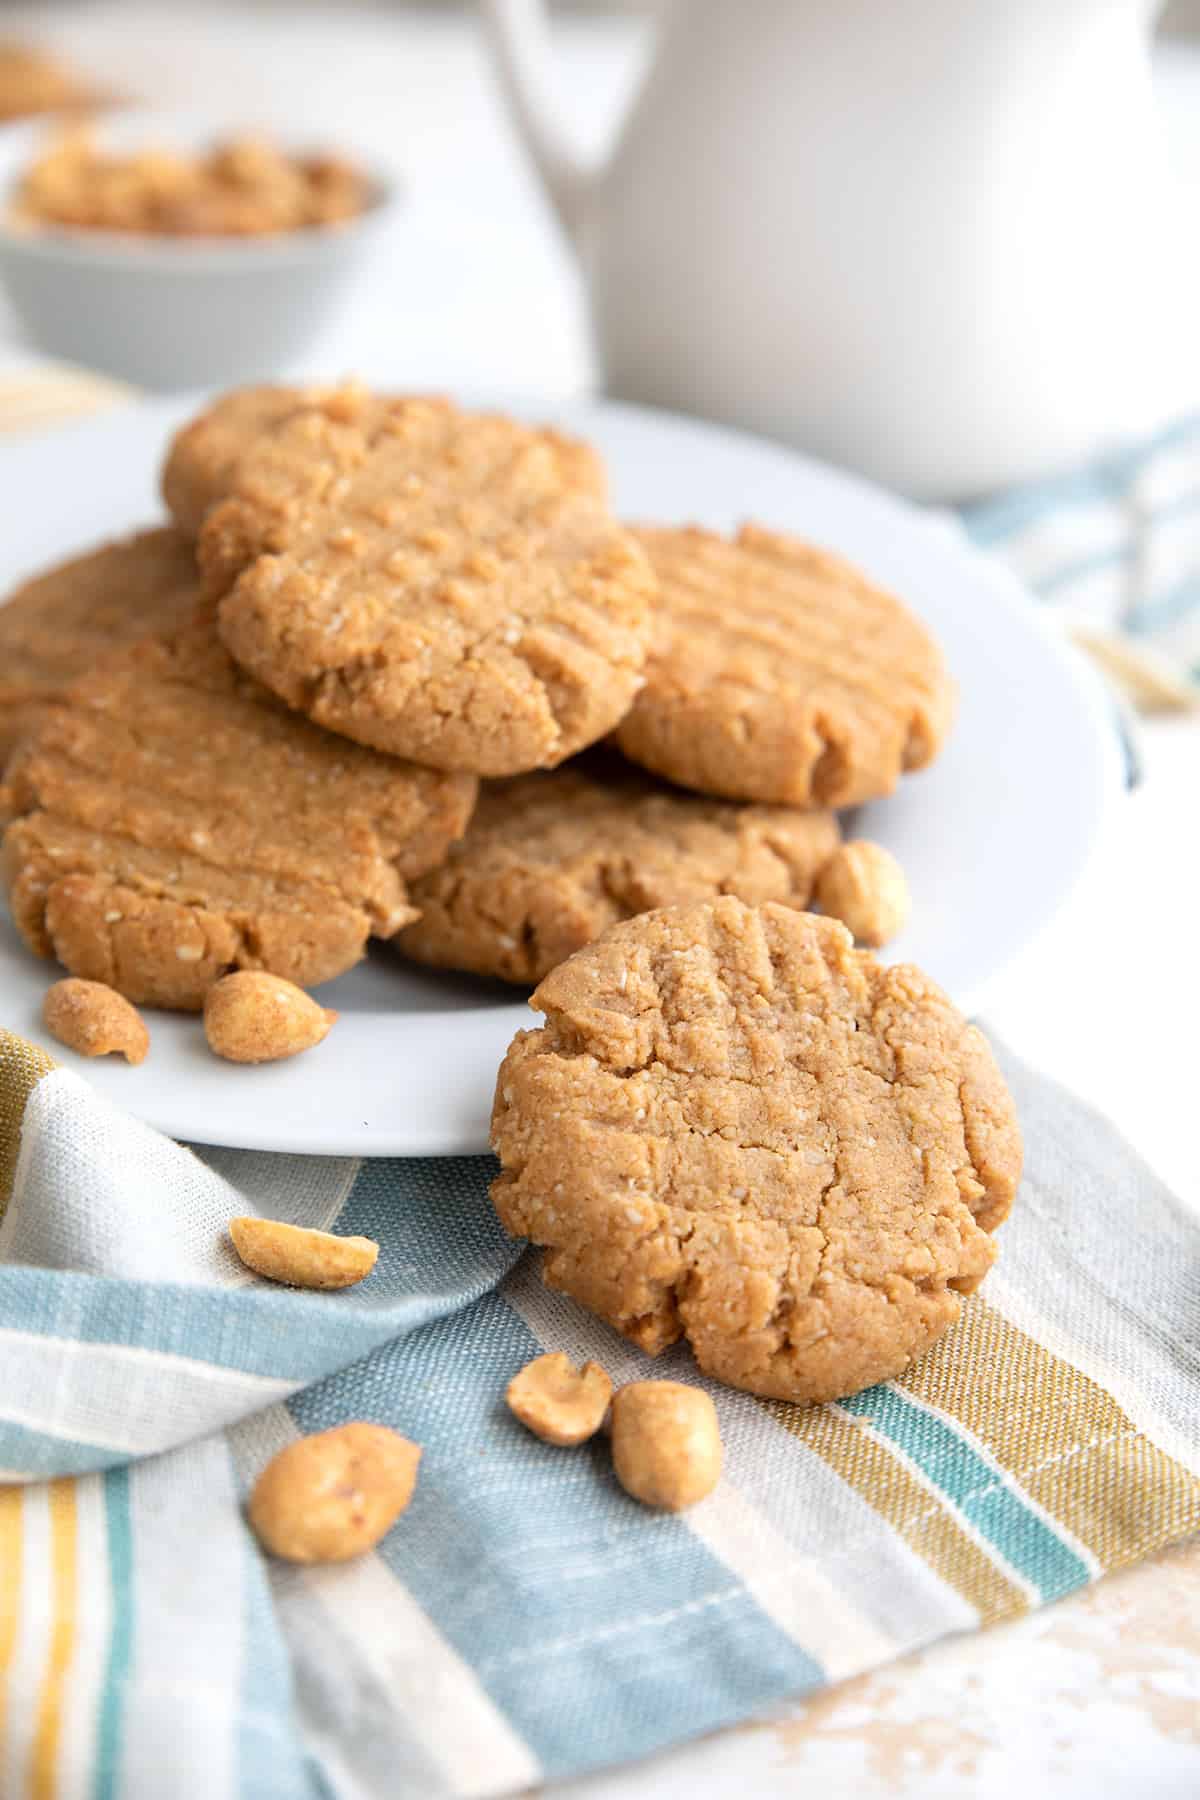 A white plate filled with Keto Peanut Butter Cookies on a striped napkin.